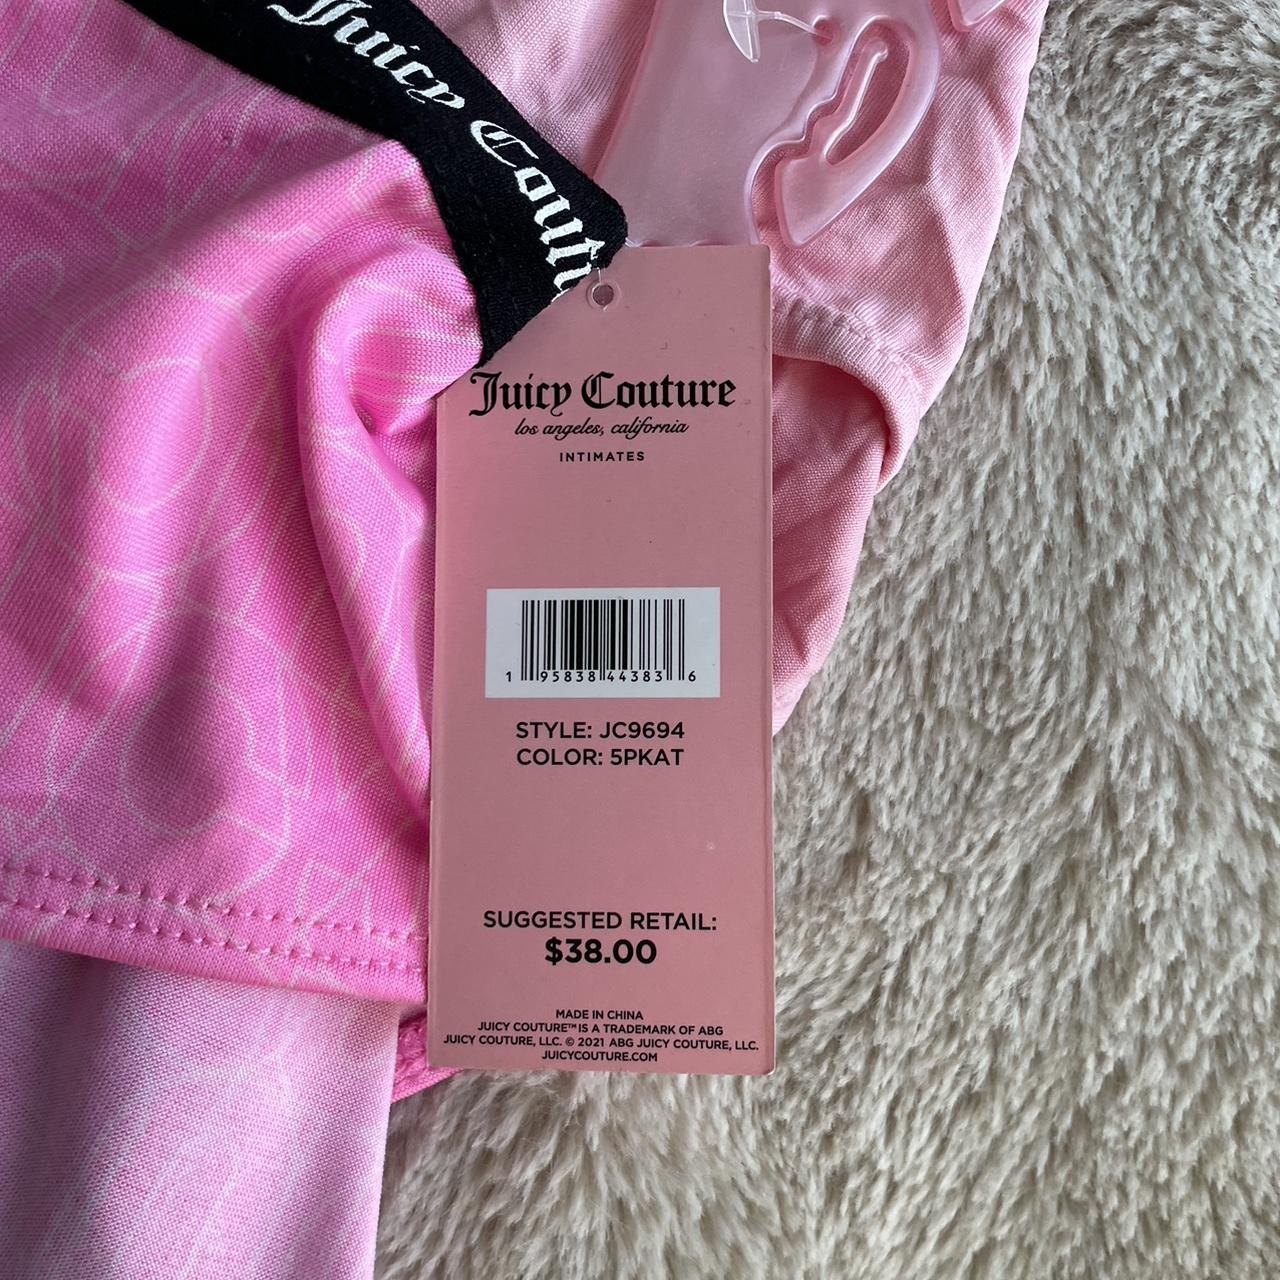 Juicy Couture Pink Panties, brand new never worn and